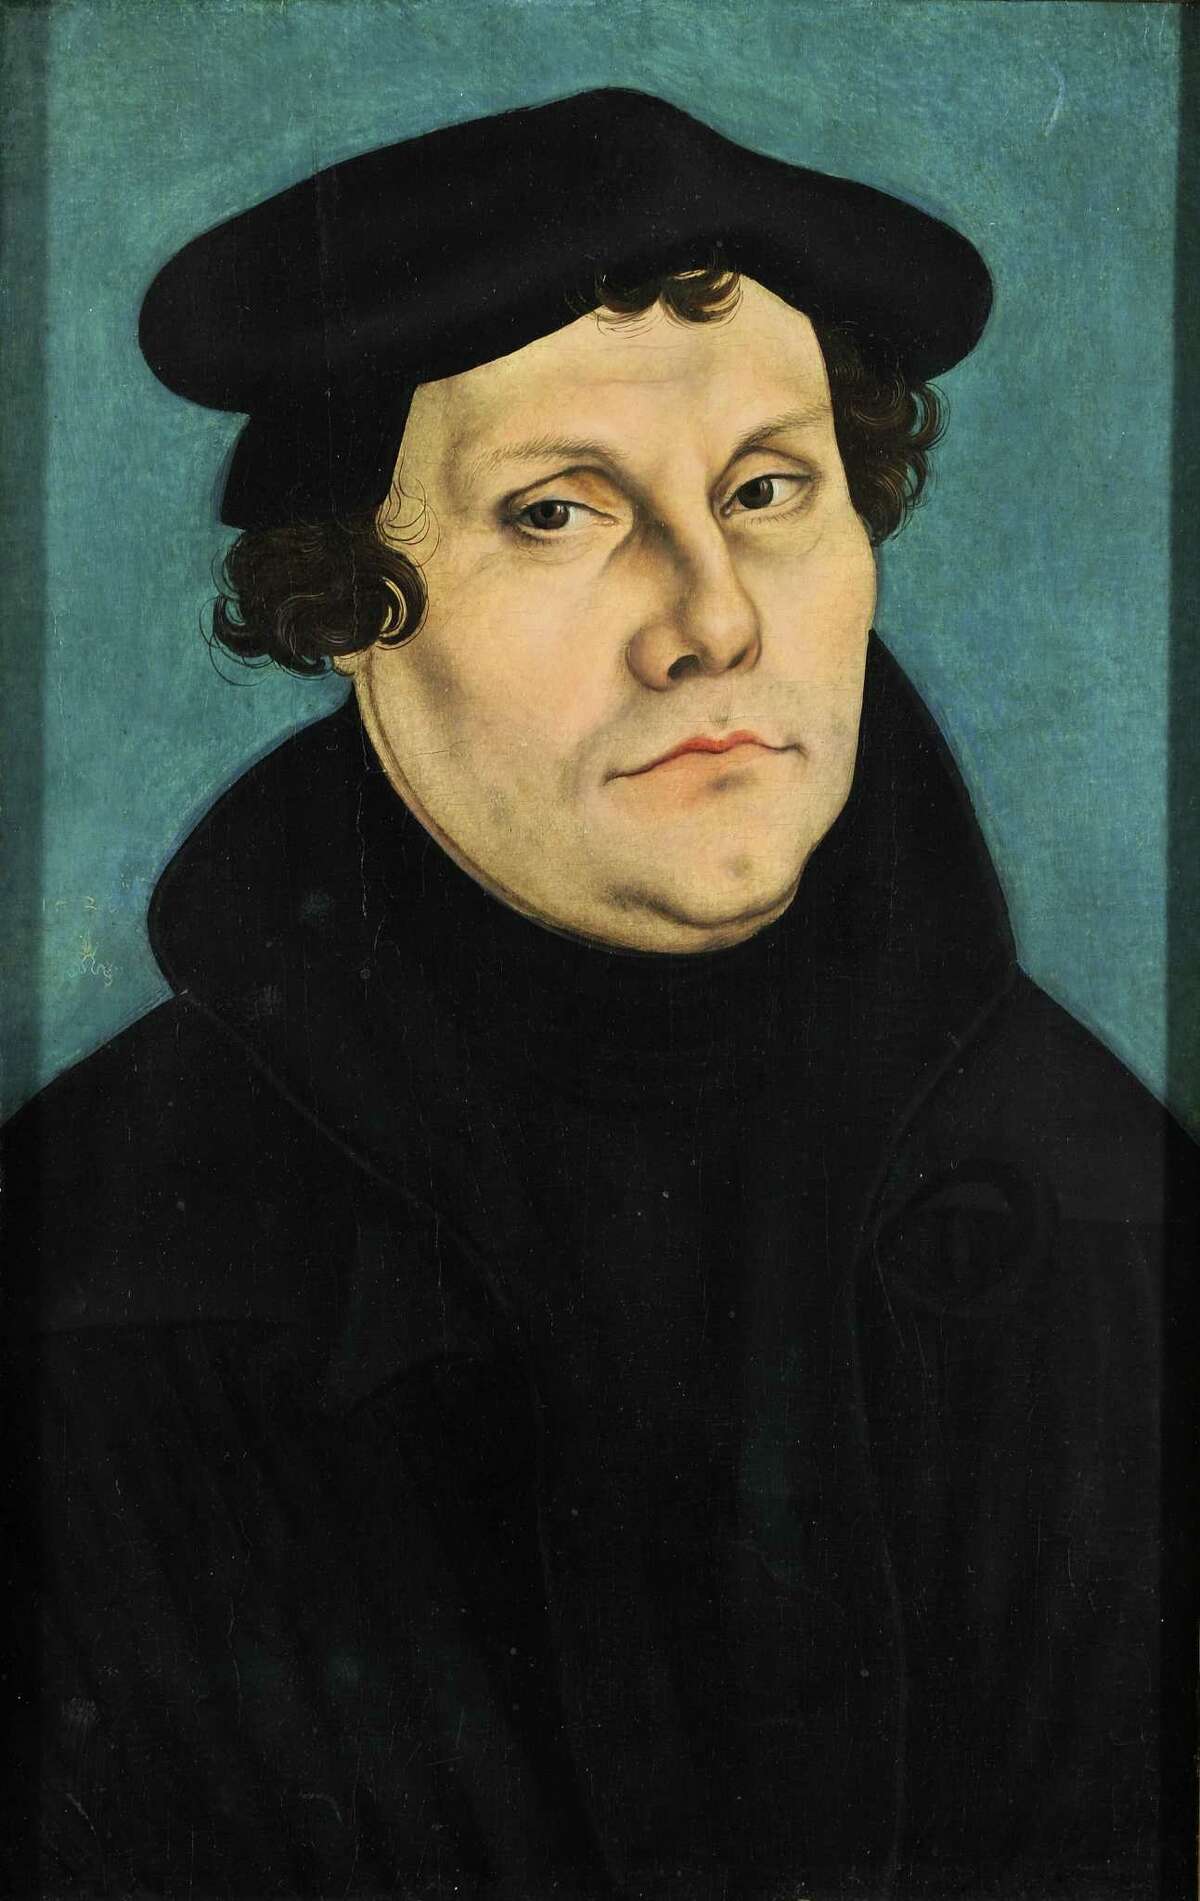 A portrait of Martin Luther by Lucas Cranach the Elder.